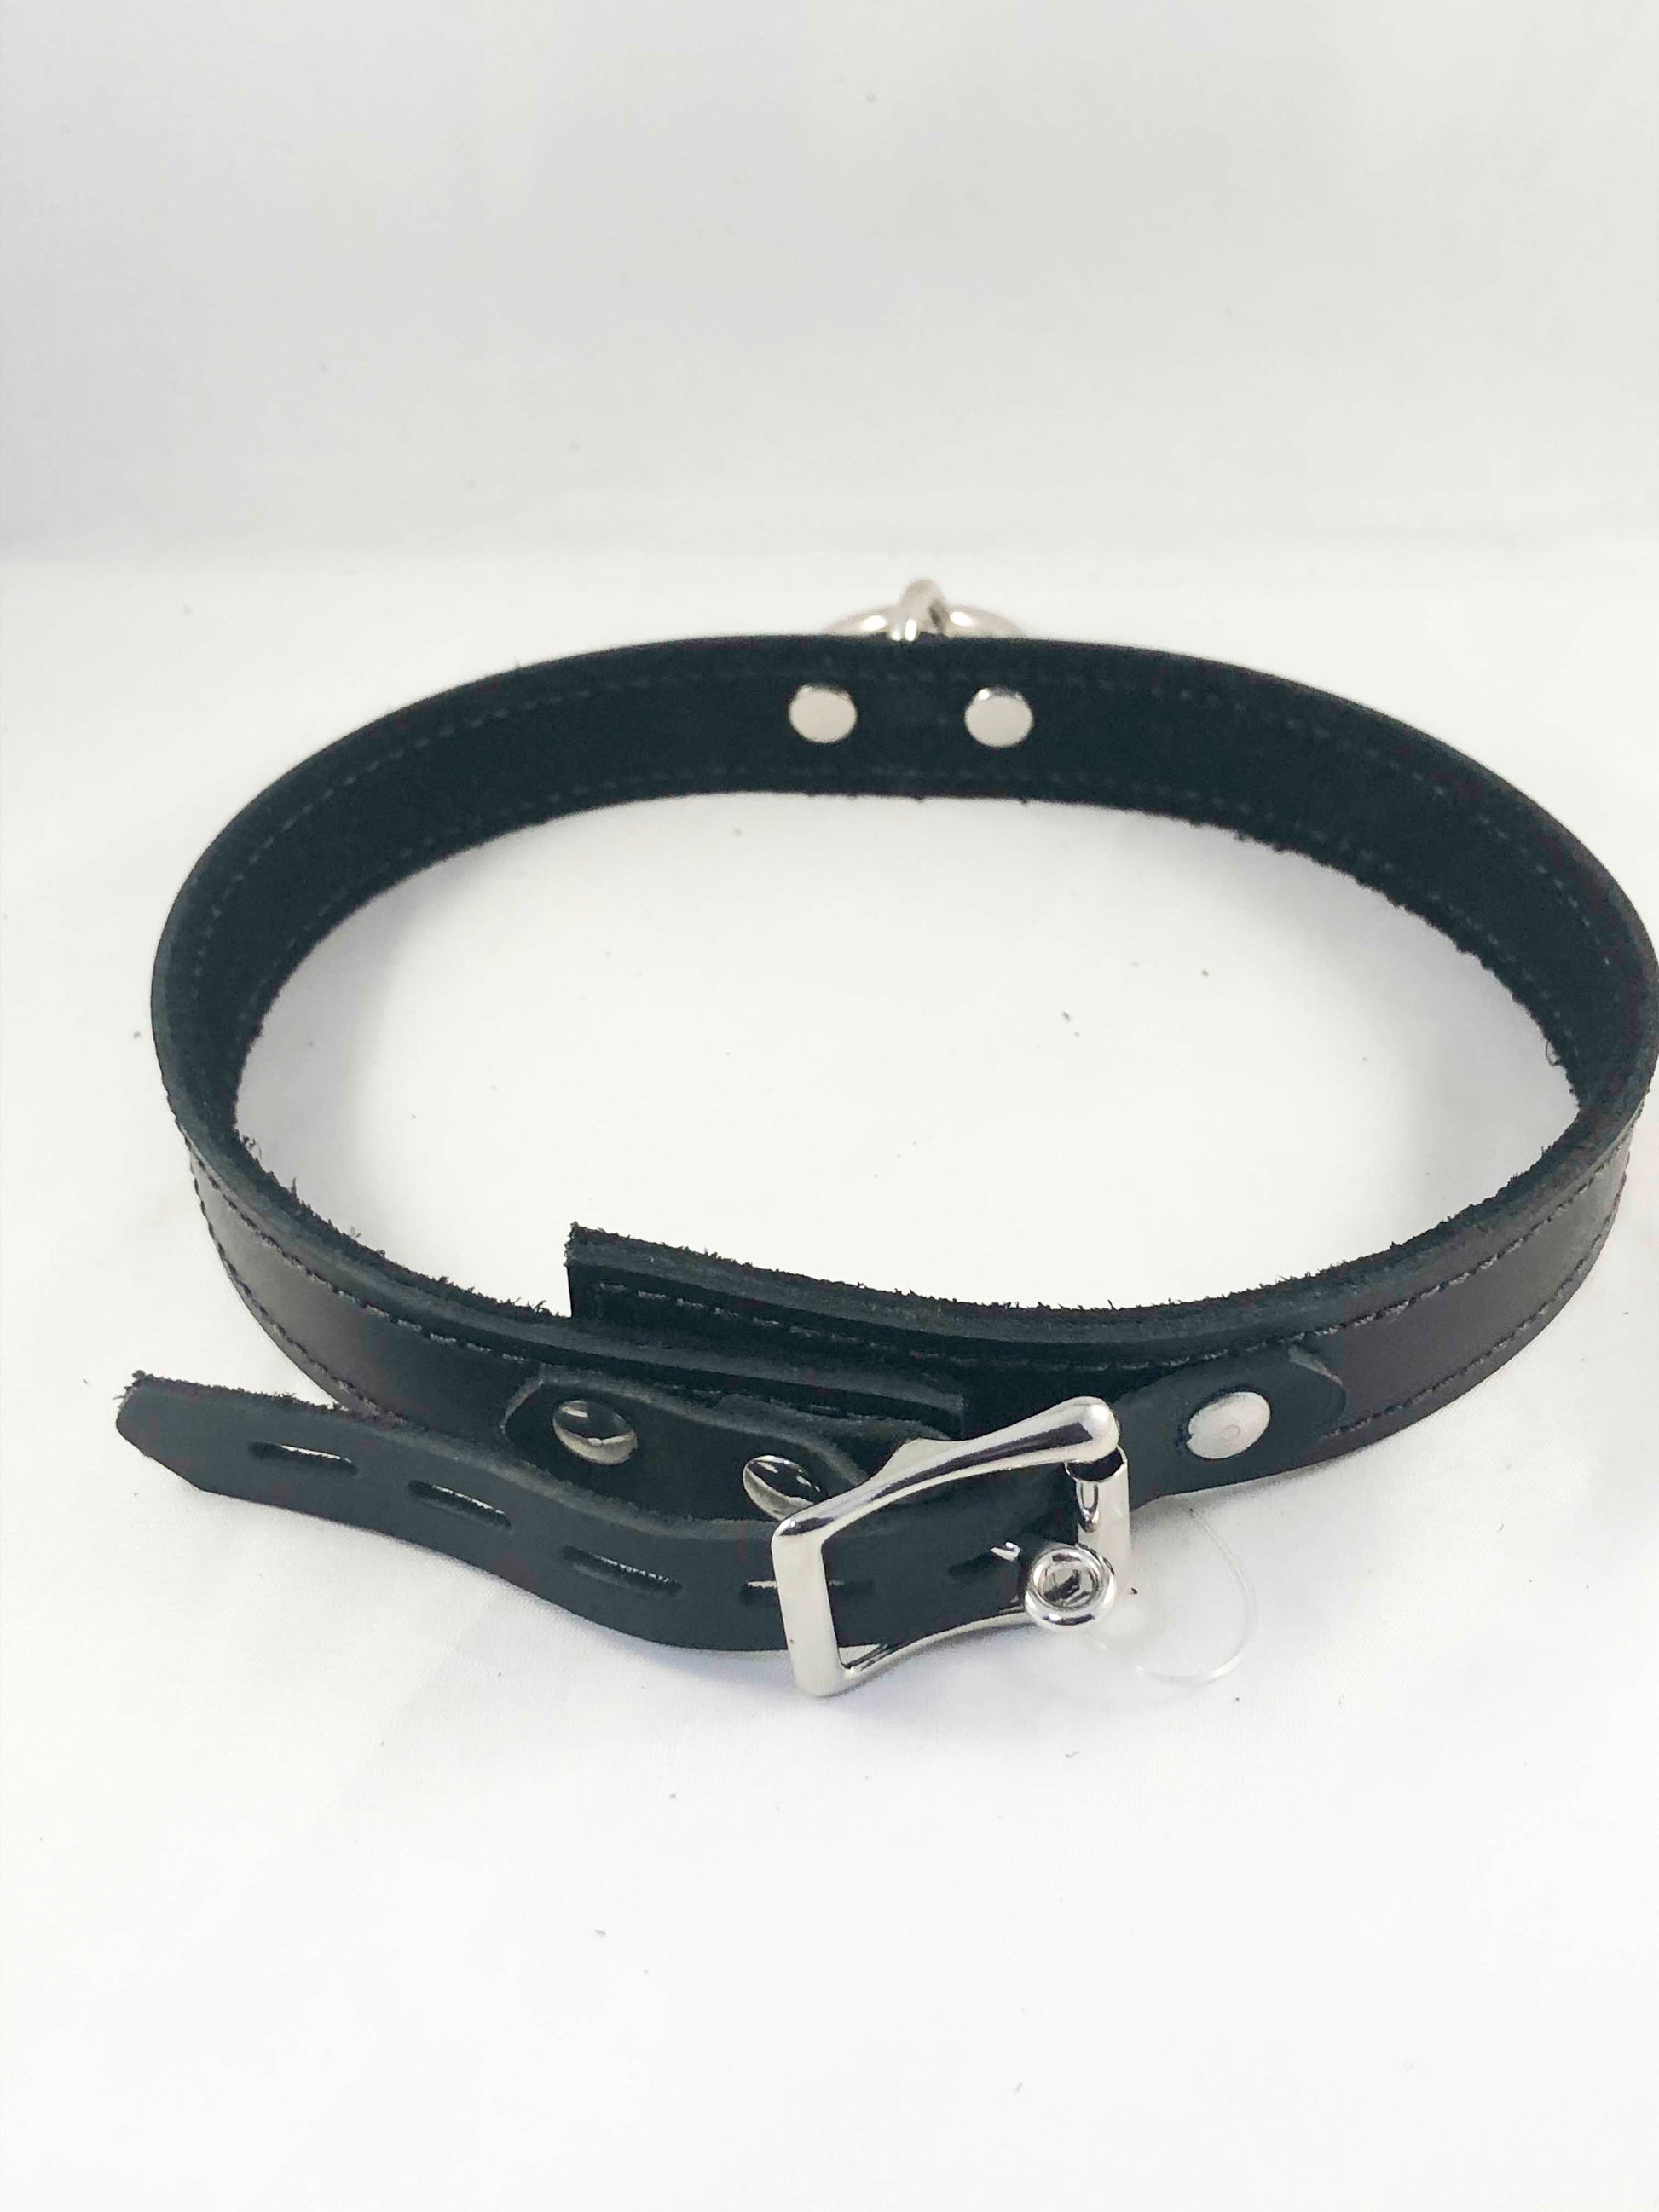 Back view of black collar